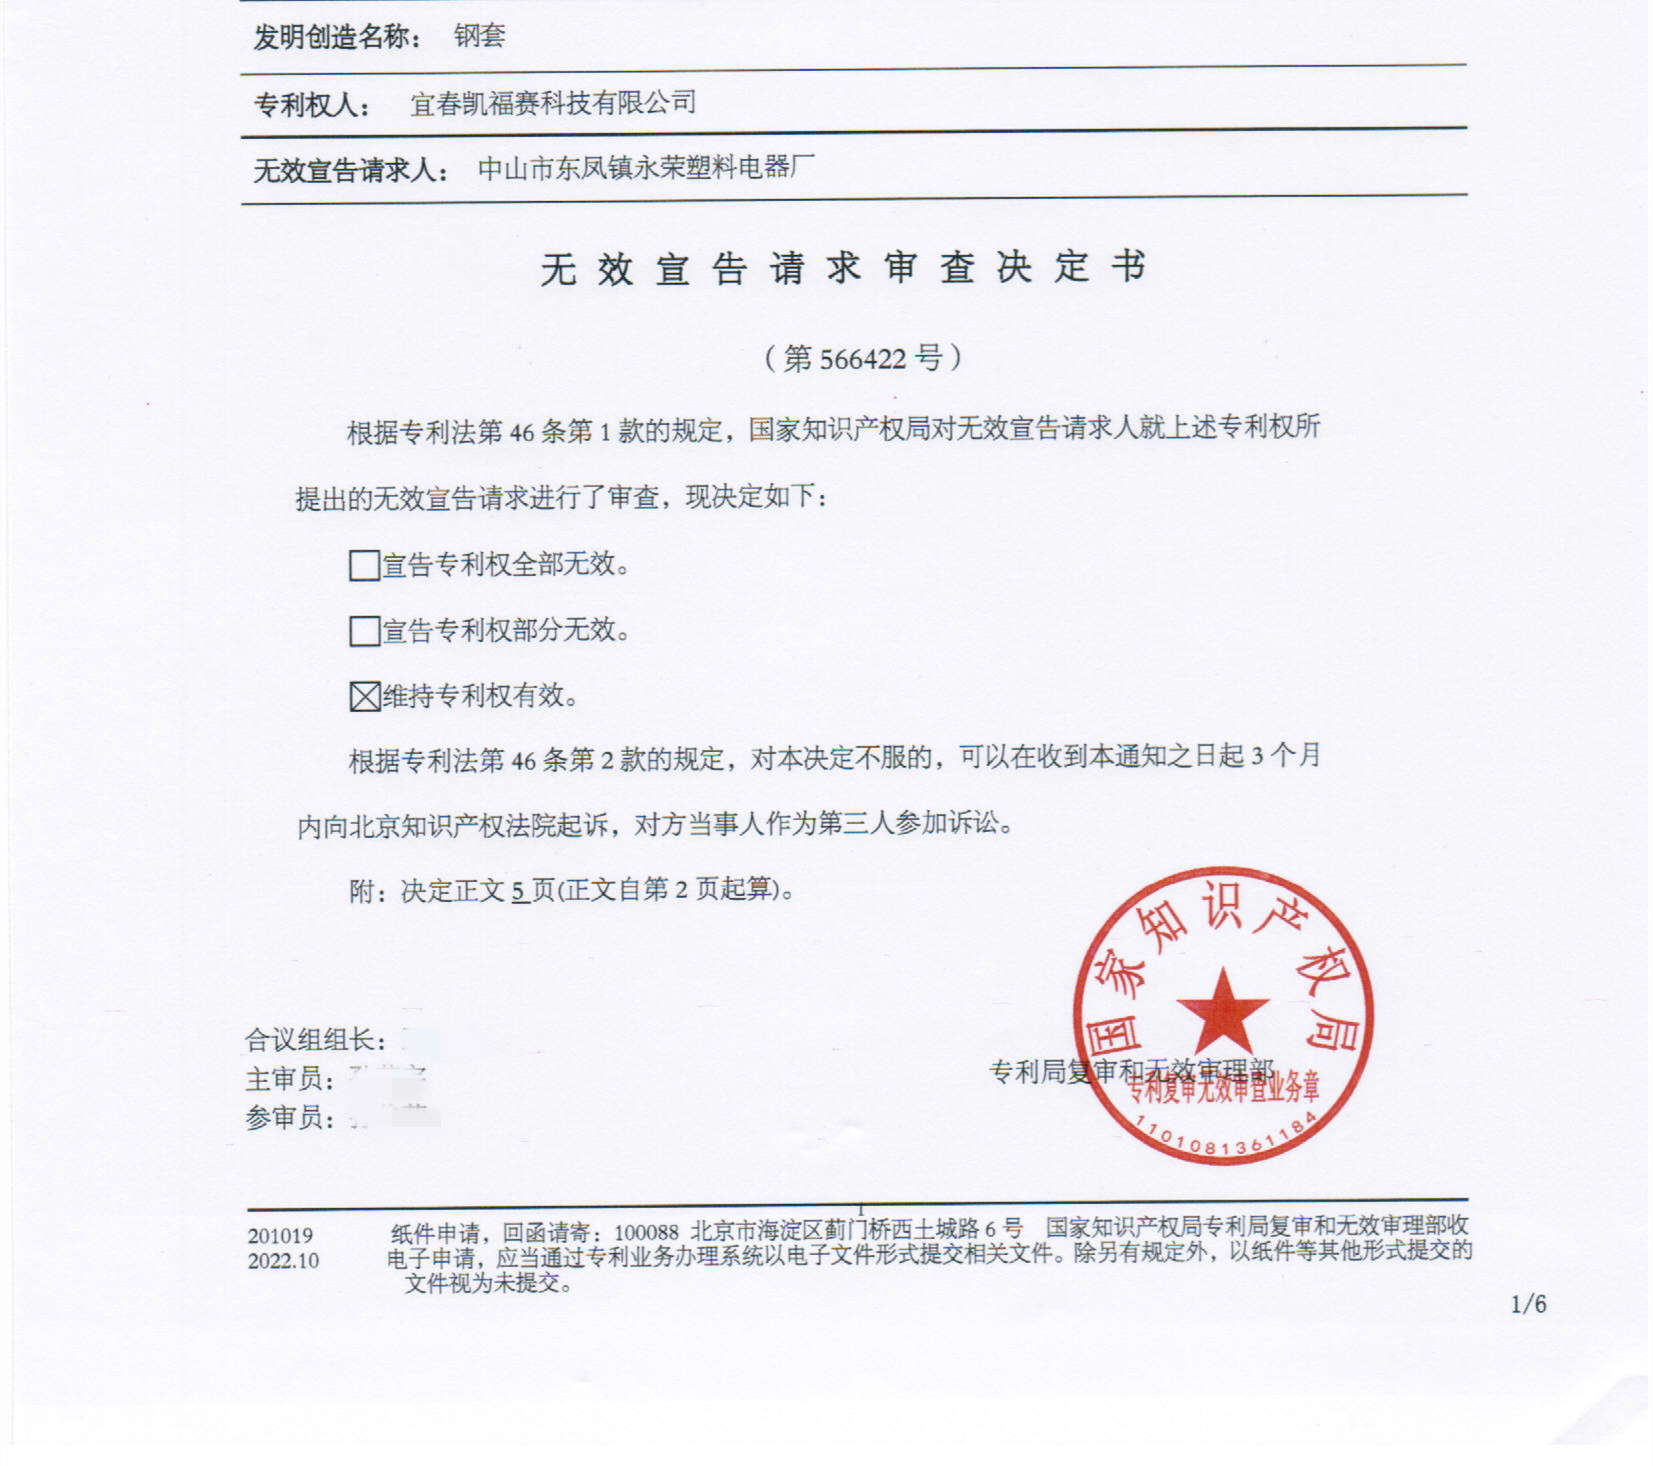 TianDun IP Agency Successfully Sustained the Defendant’s Industrial Design Patent Right